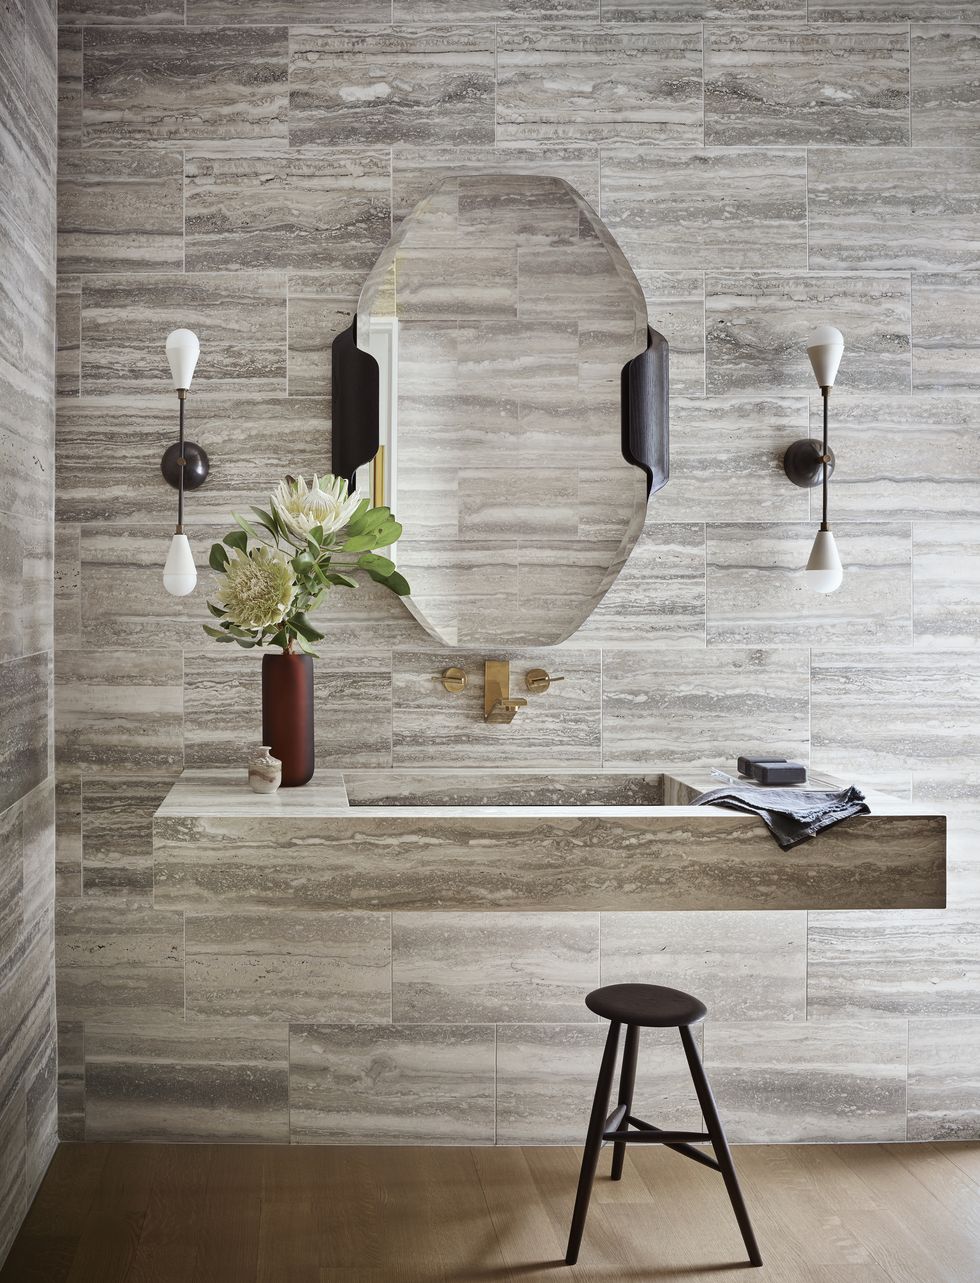 in the powder room, travertine stone extends to a floating custom sink